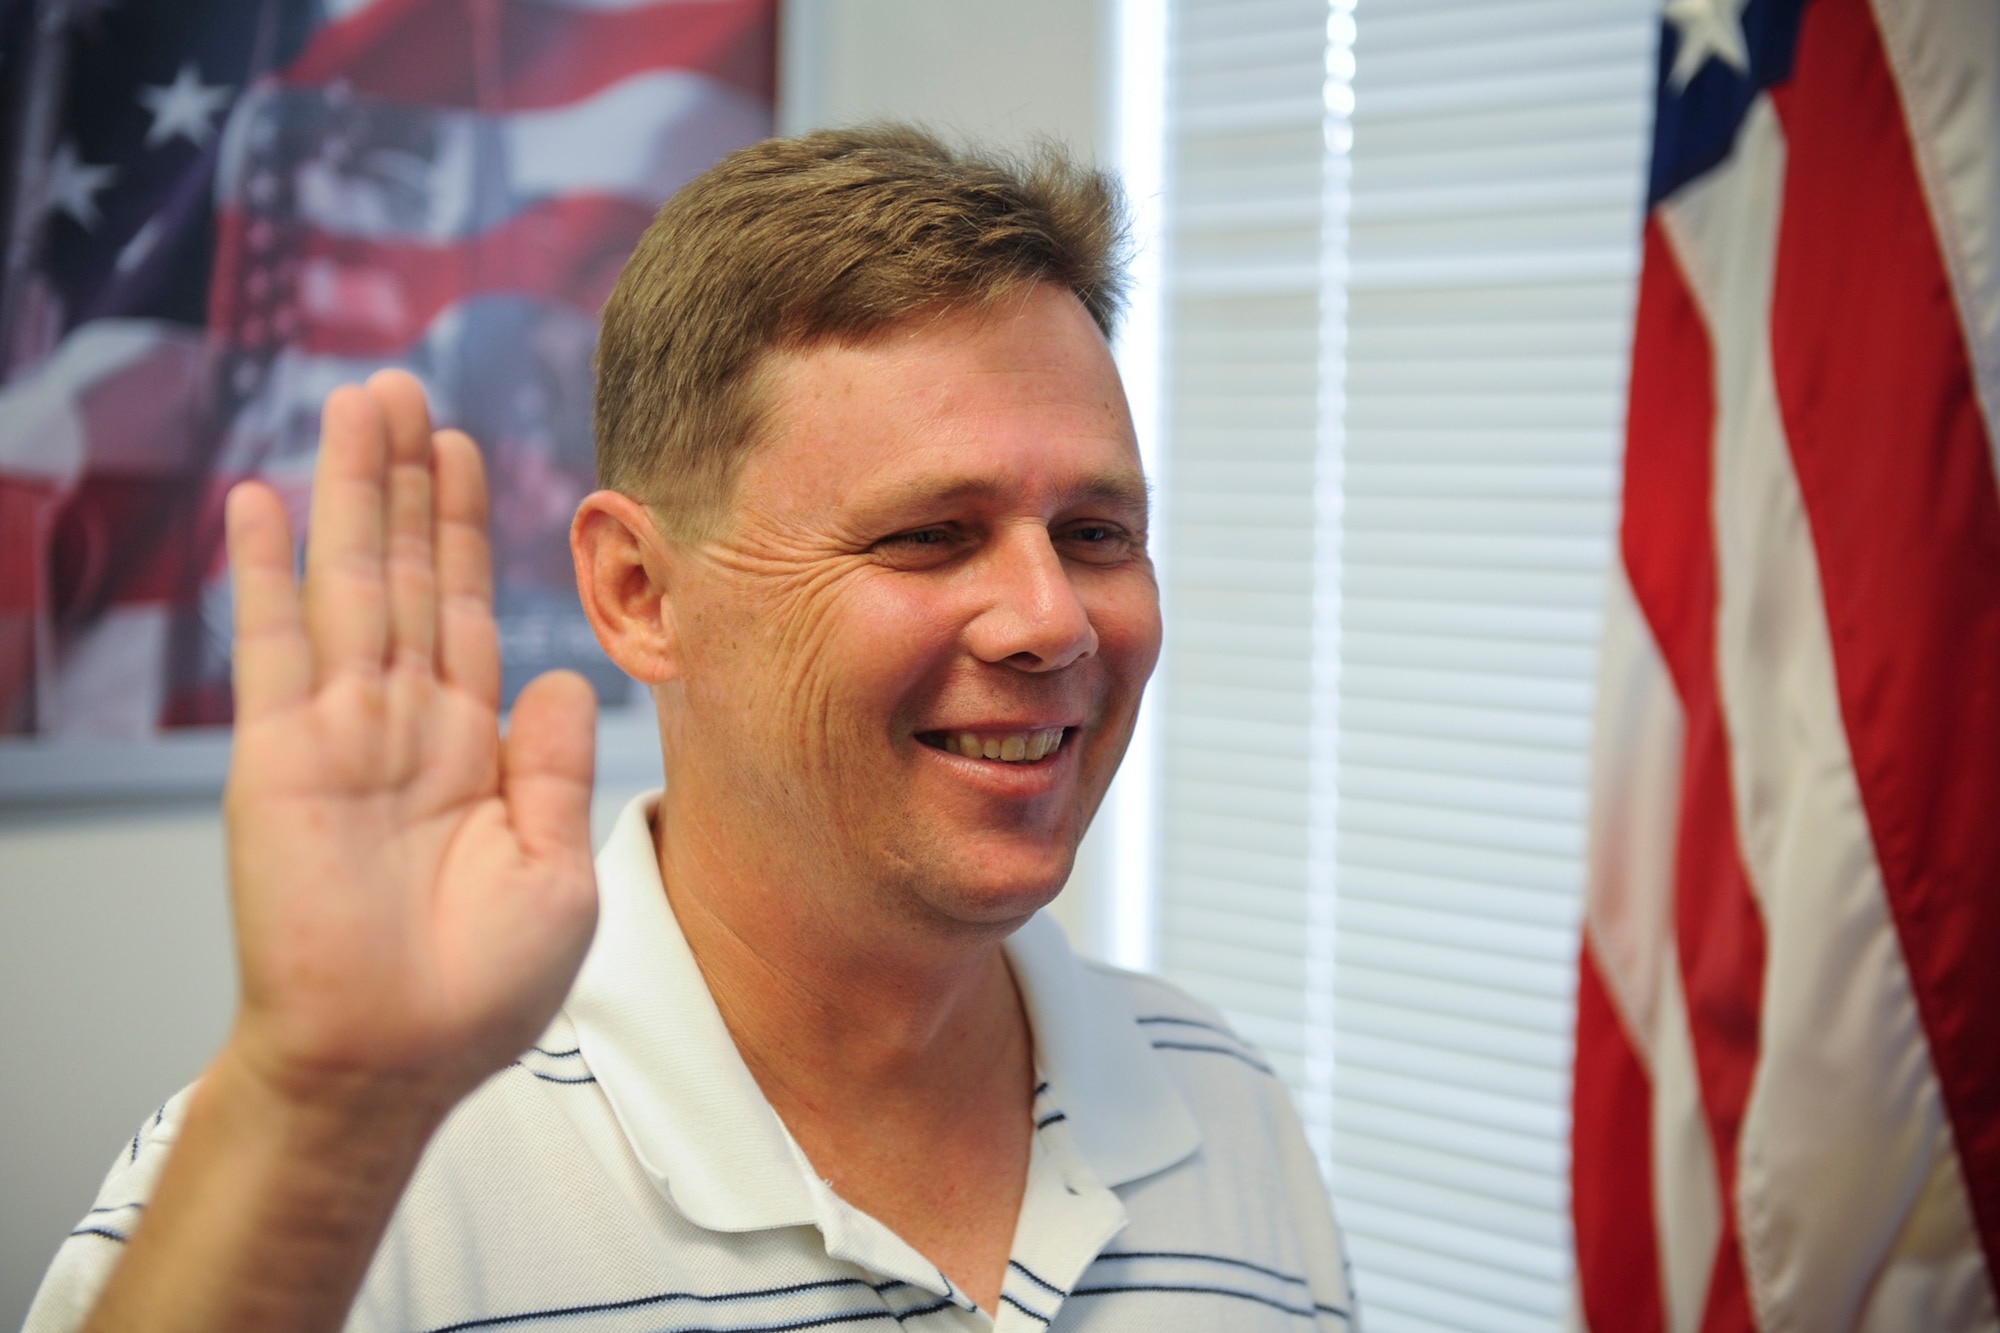 Scott Long recites the Oath of Enlistment during a ceremony July 28, 2011, in Valdosta, Ga. After a 19-year break in service, Long said his biggest challenge in reenlisting was making sure he was still physically and medically qualified. (U.S. Air Force photo by Staff Sgt. Jamal D. Sutter/Released)